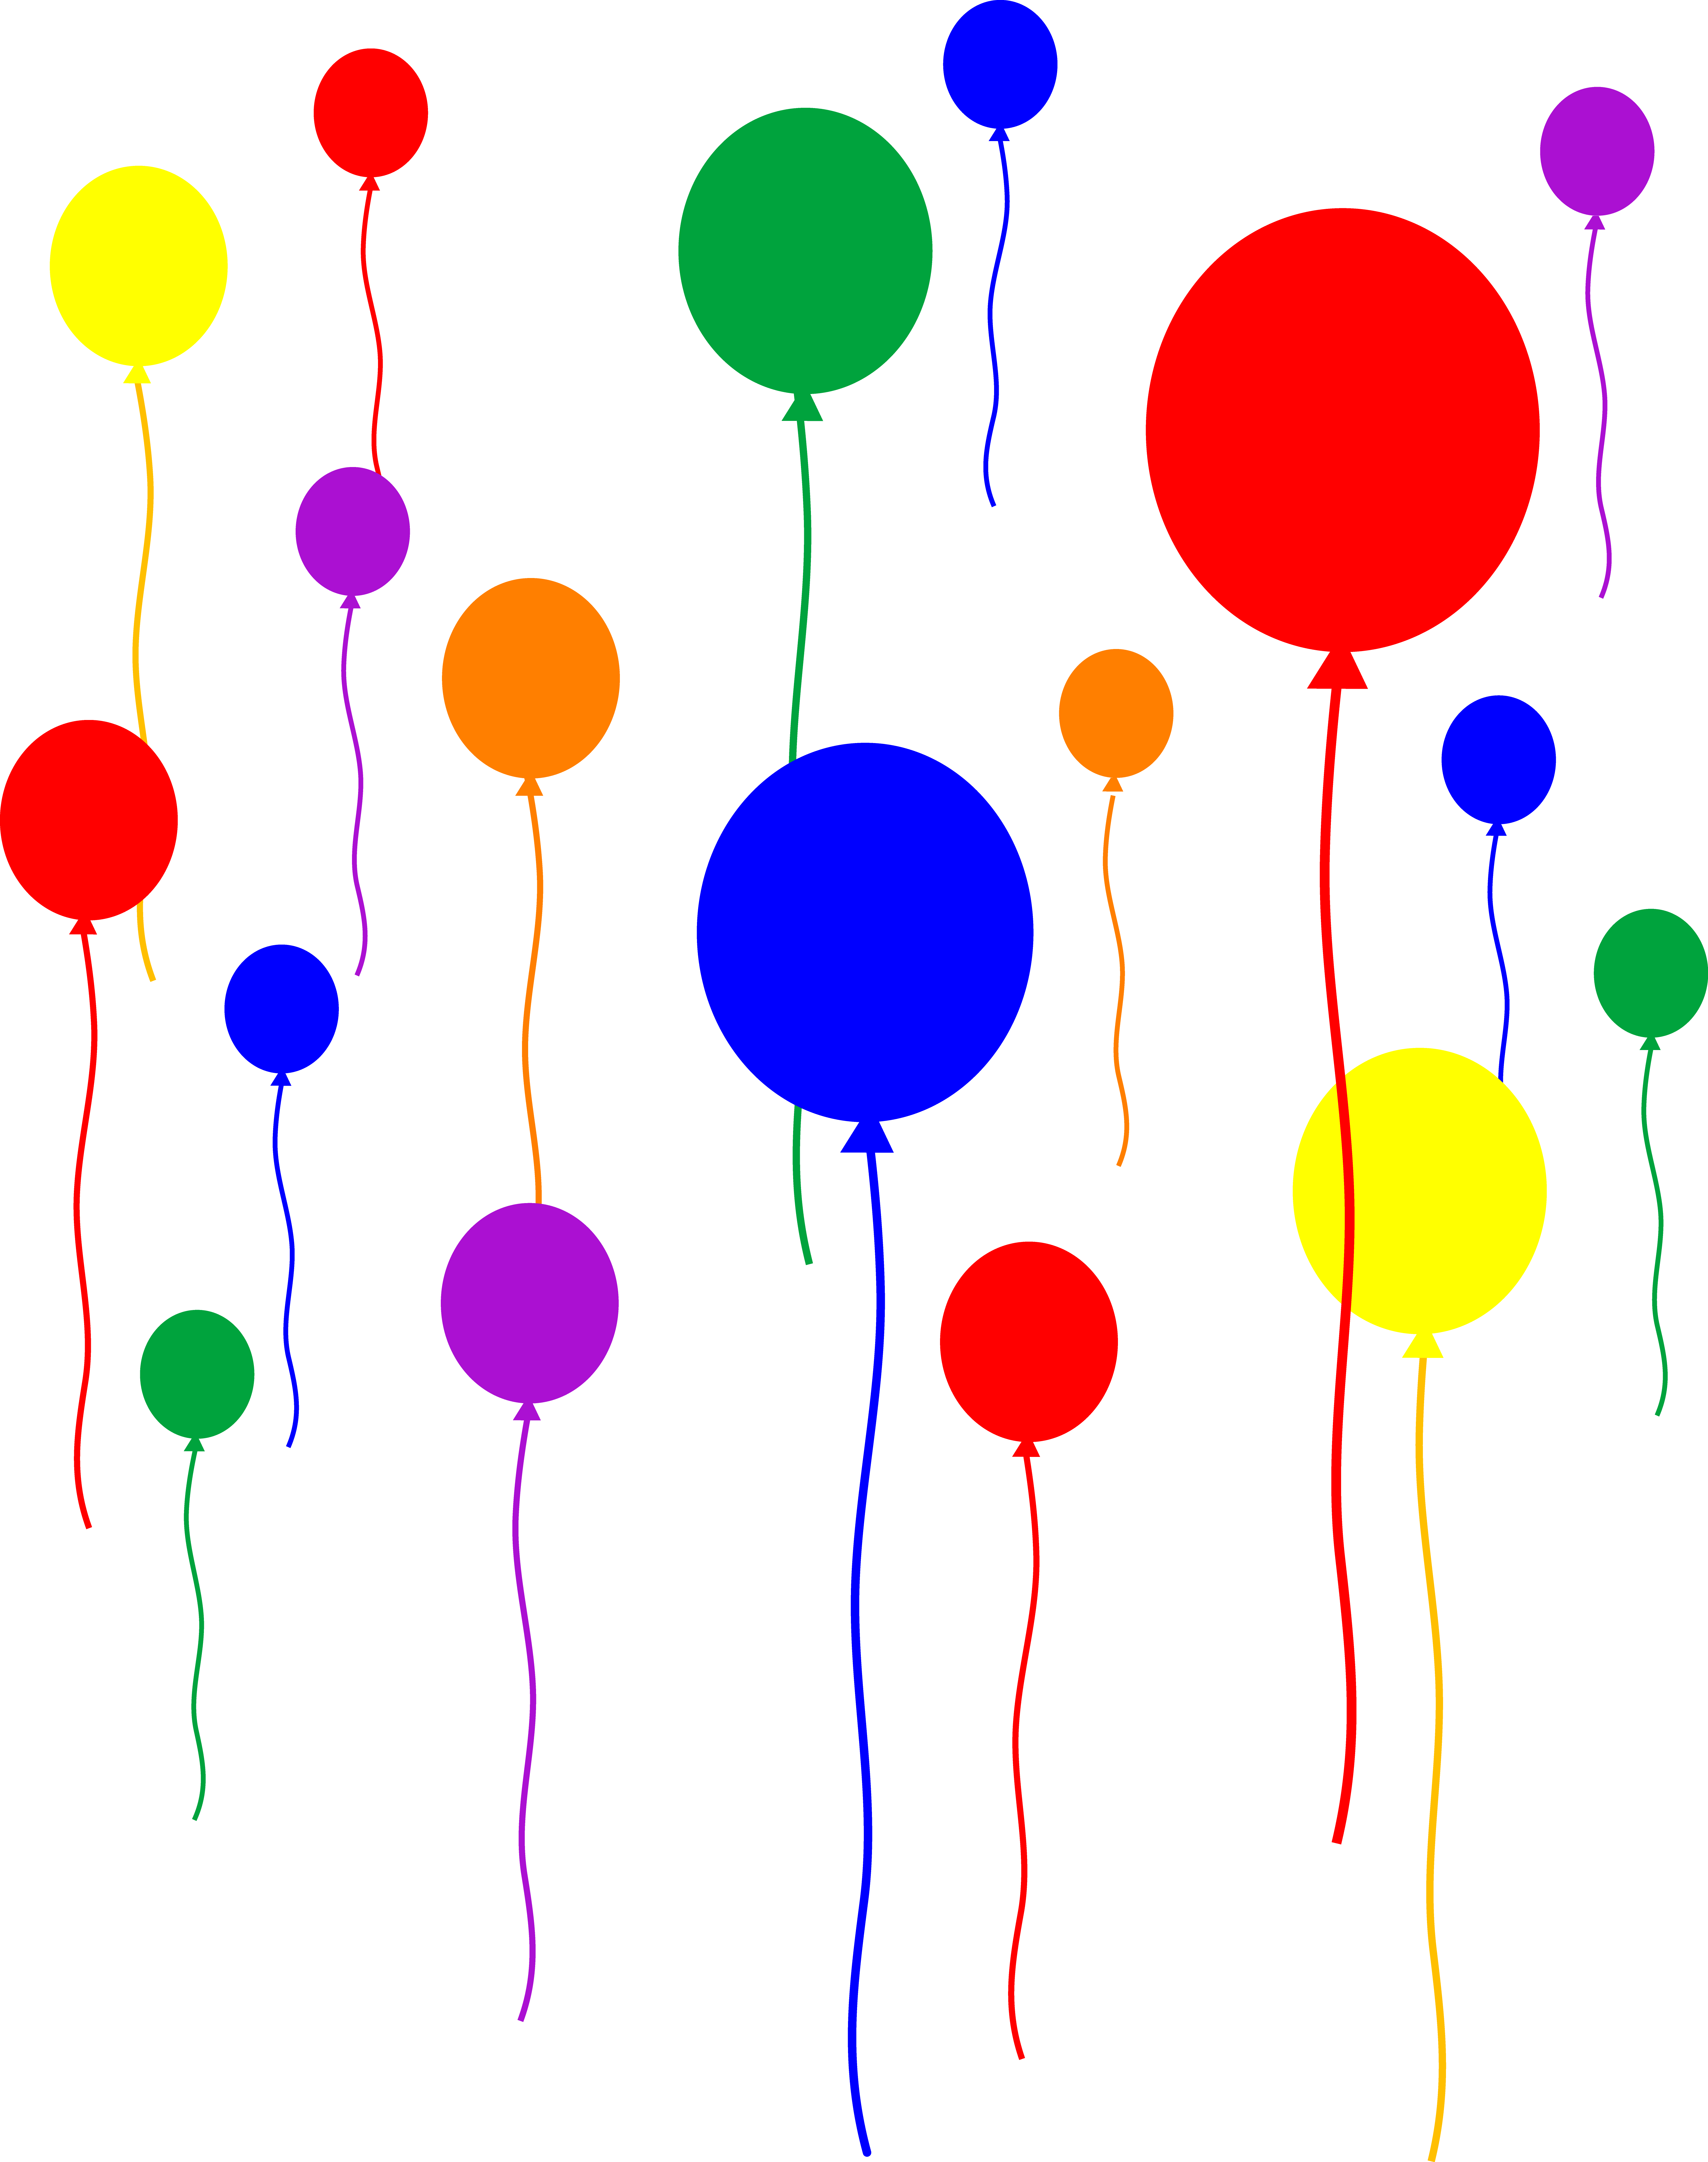 On Transparent Background Free Party Balloons Clipart Celebration